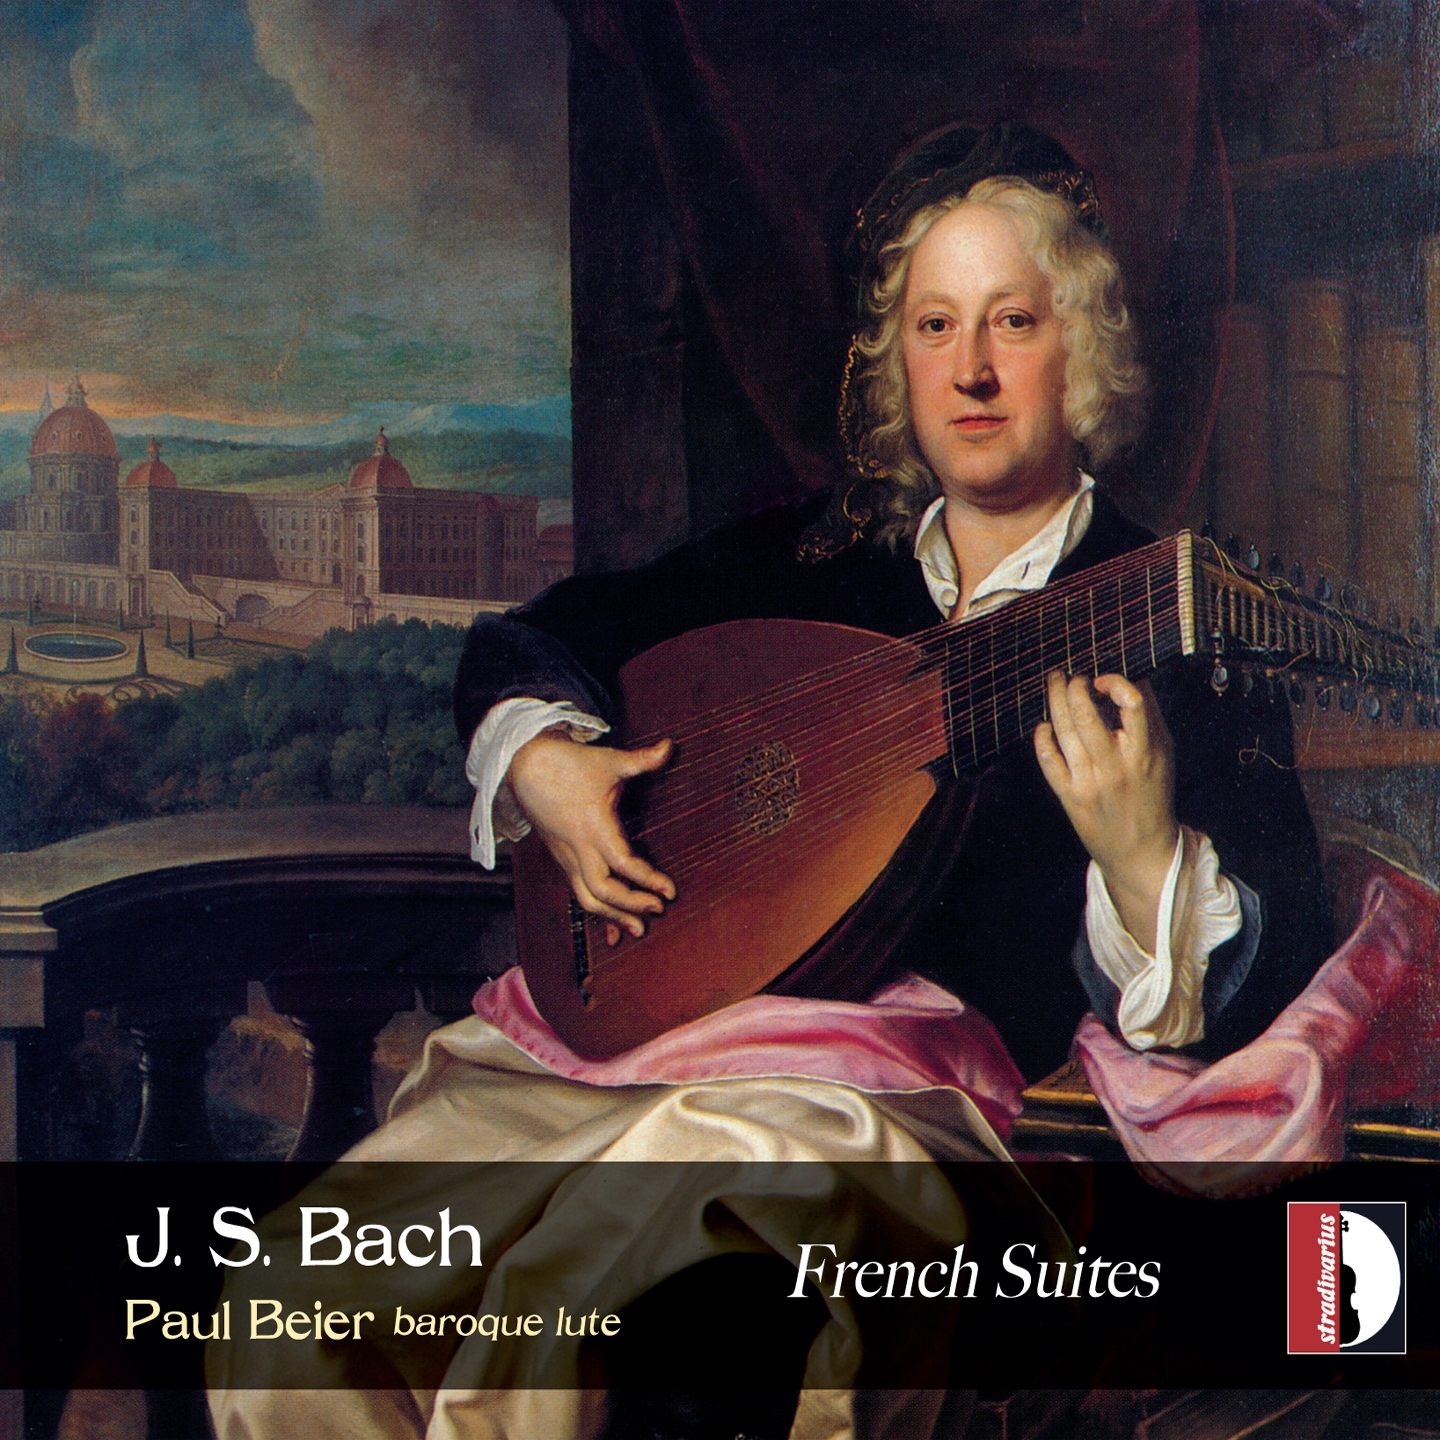 6 French Suites, No. 3 in B-Flat Minor, BWV 814: VI. Gigue (Transcription for Lute)